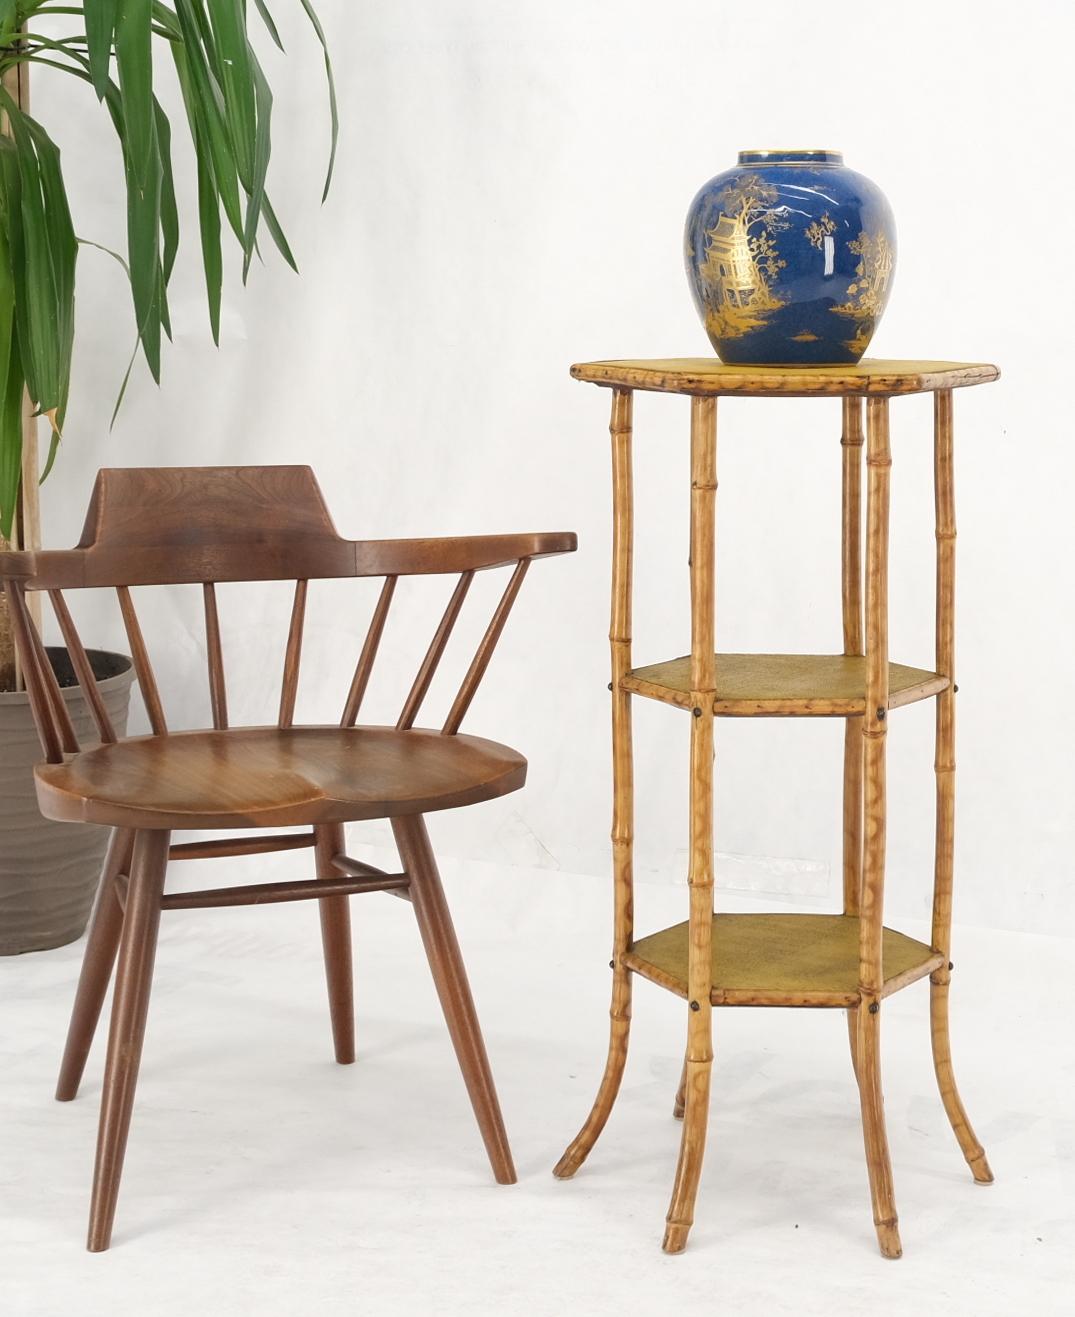 3 Tier Grass Cloth Hexagon Burnt Bamboo Antique Pedestal Candle Lamp Table Stand In Good Condition For Sale In Rockaway, NJ